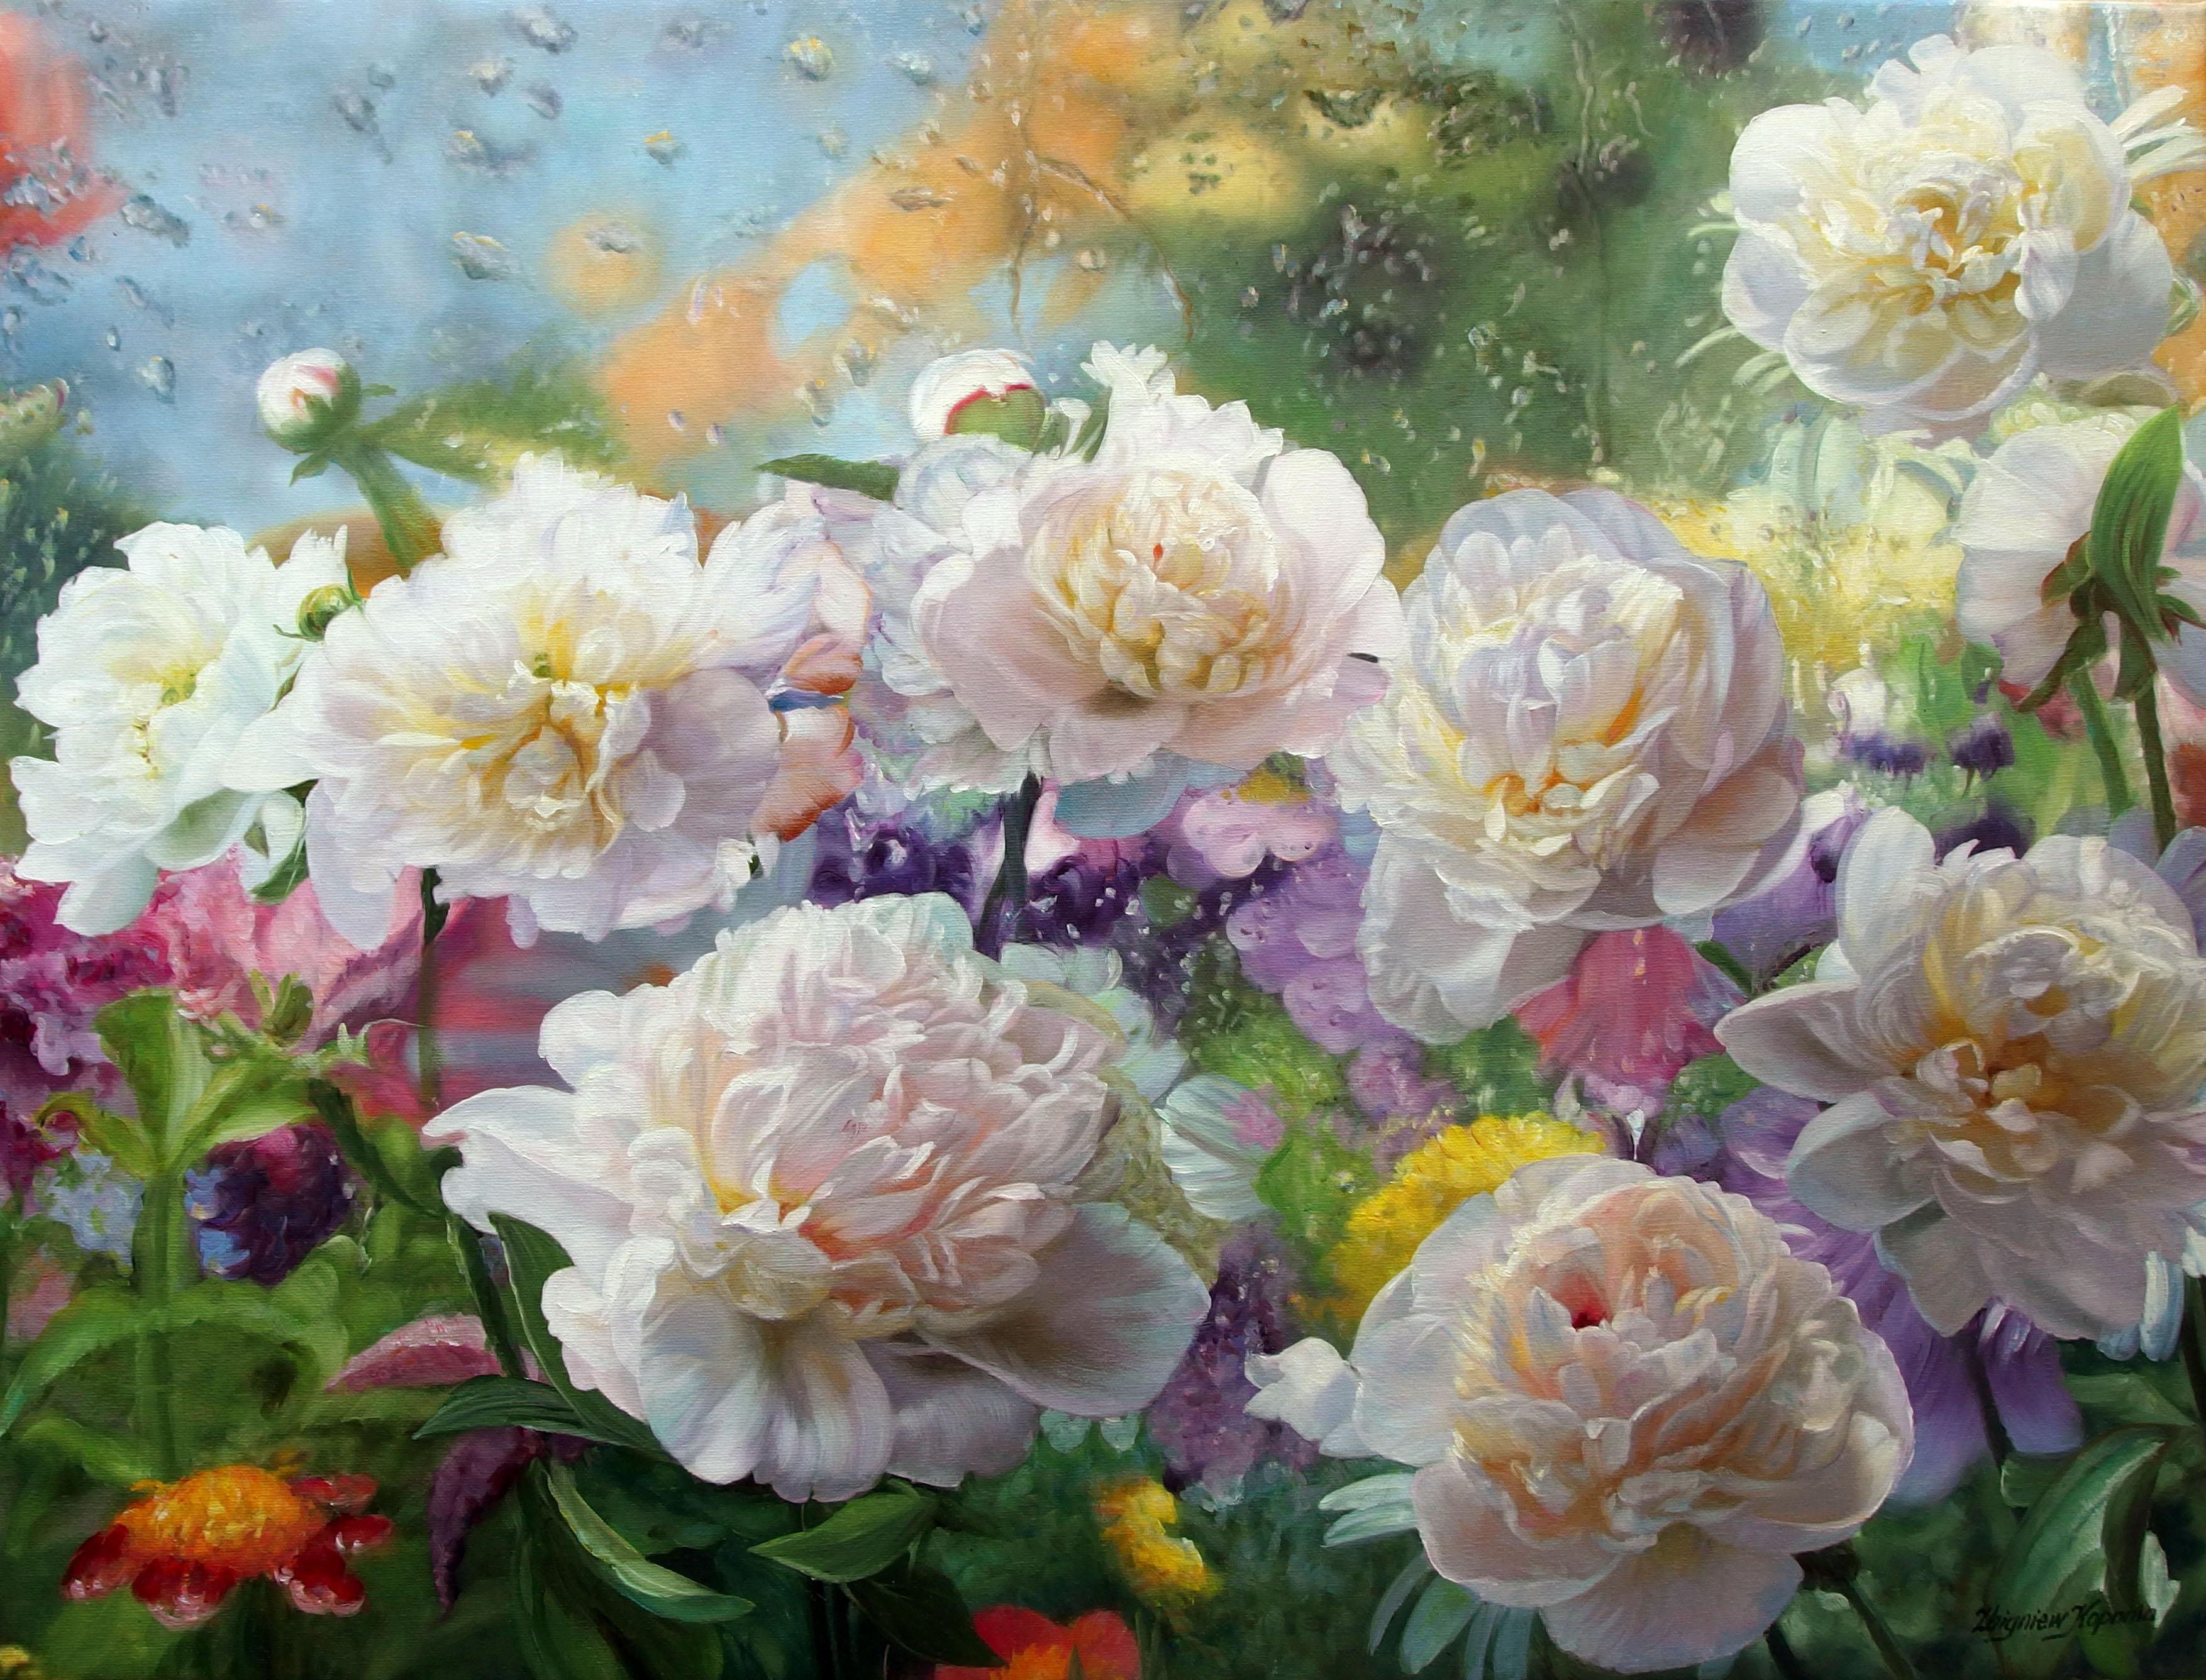 Zbigniew Kopania Figurative Painting - After The Rain Still Life With Peonies Oil painting